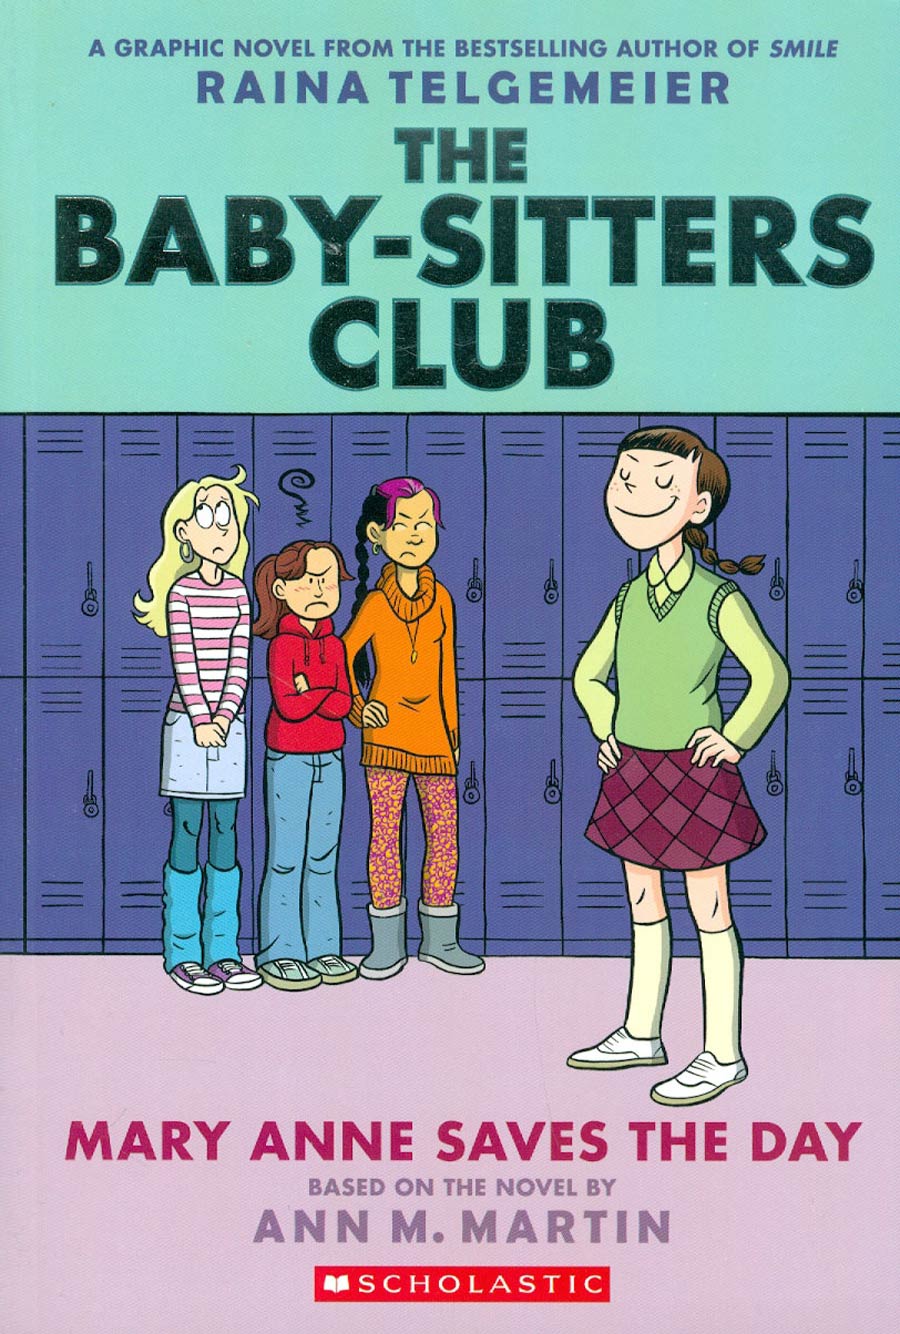 Baby-Sitters Club Color Edition Vol 3 Mary Anne Saves The Day TP